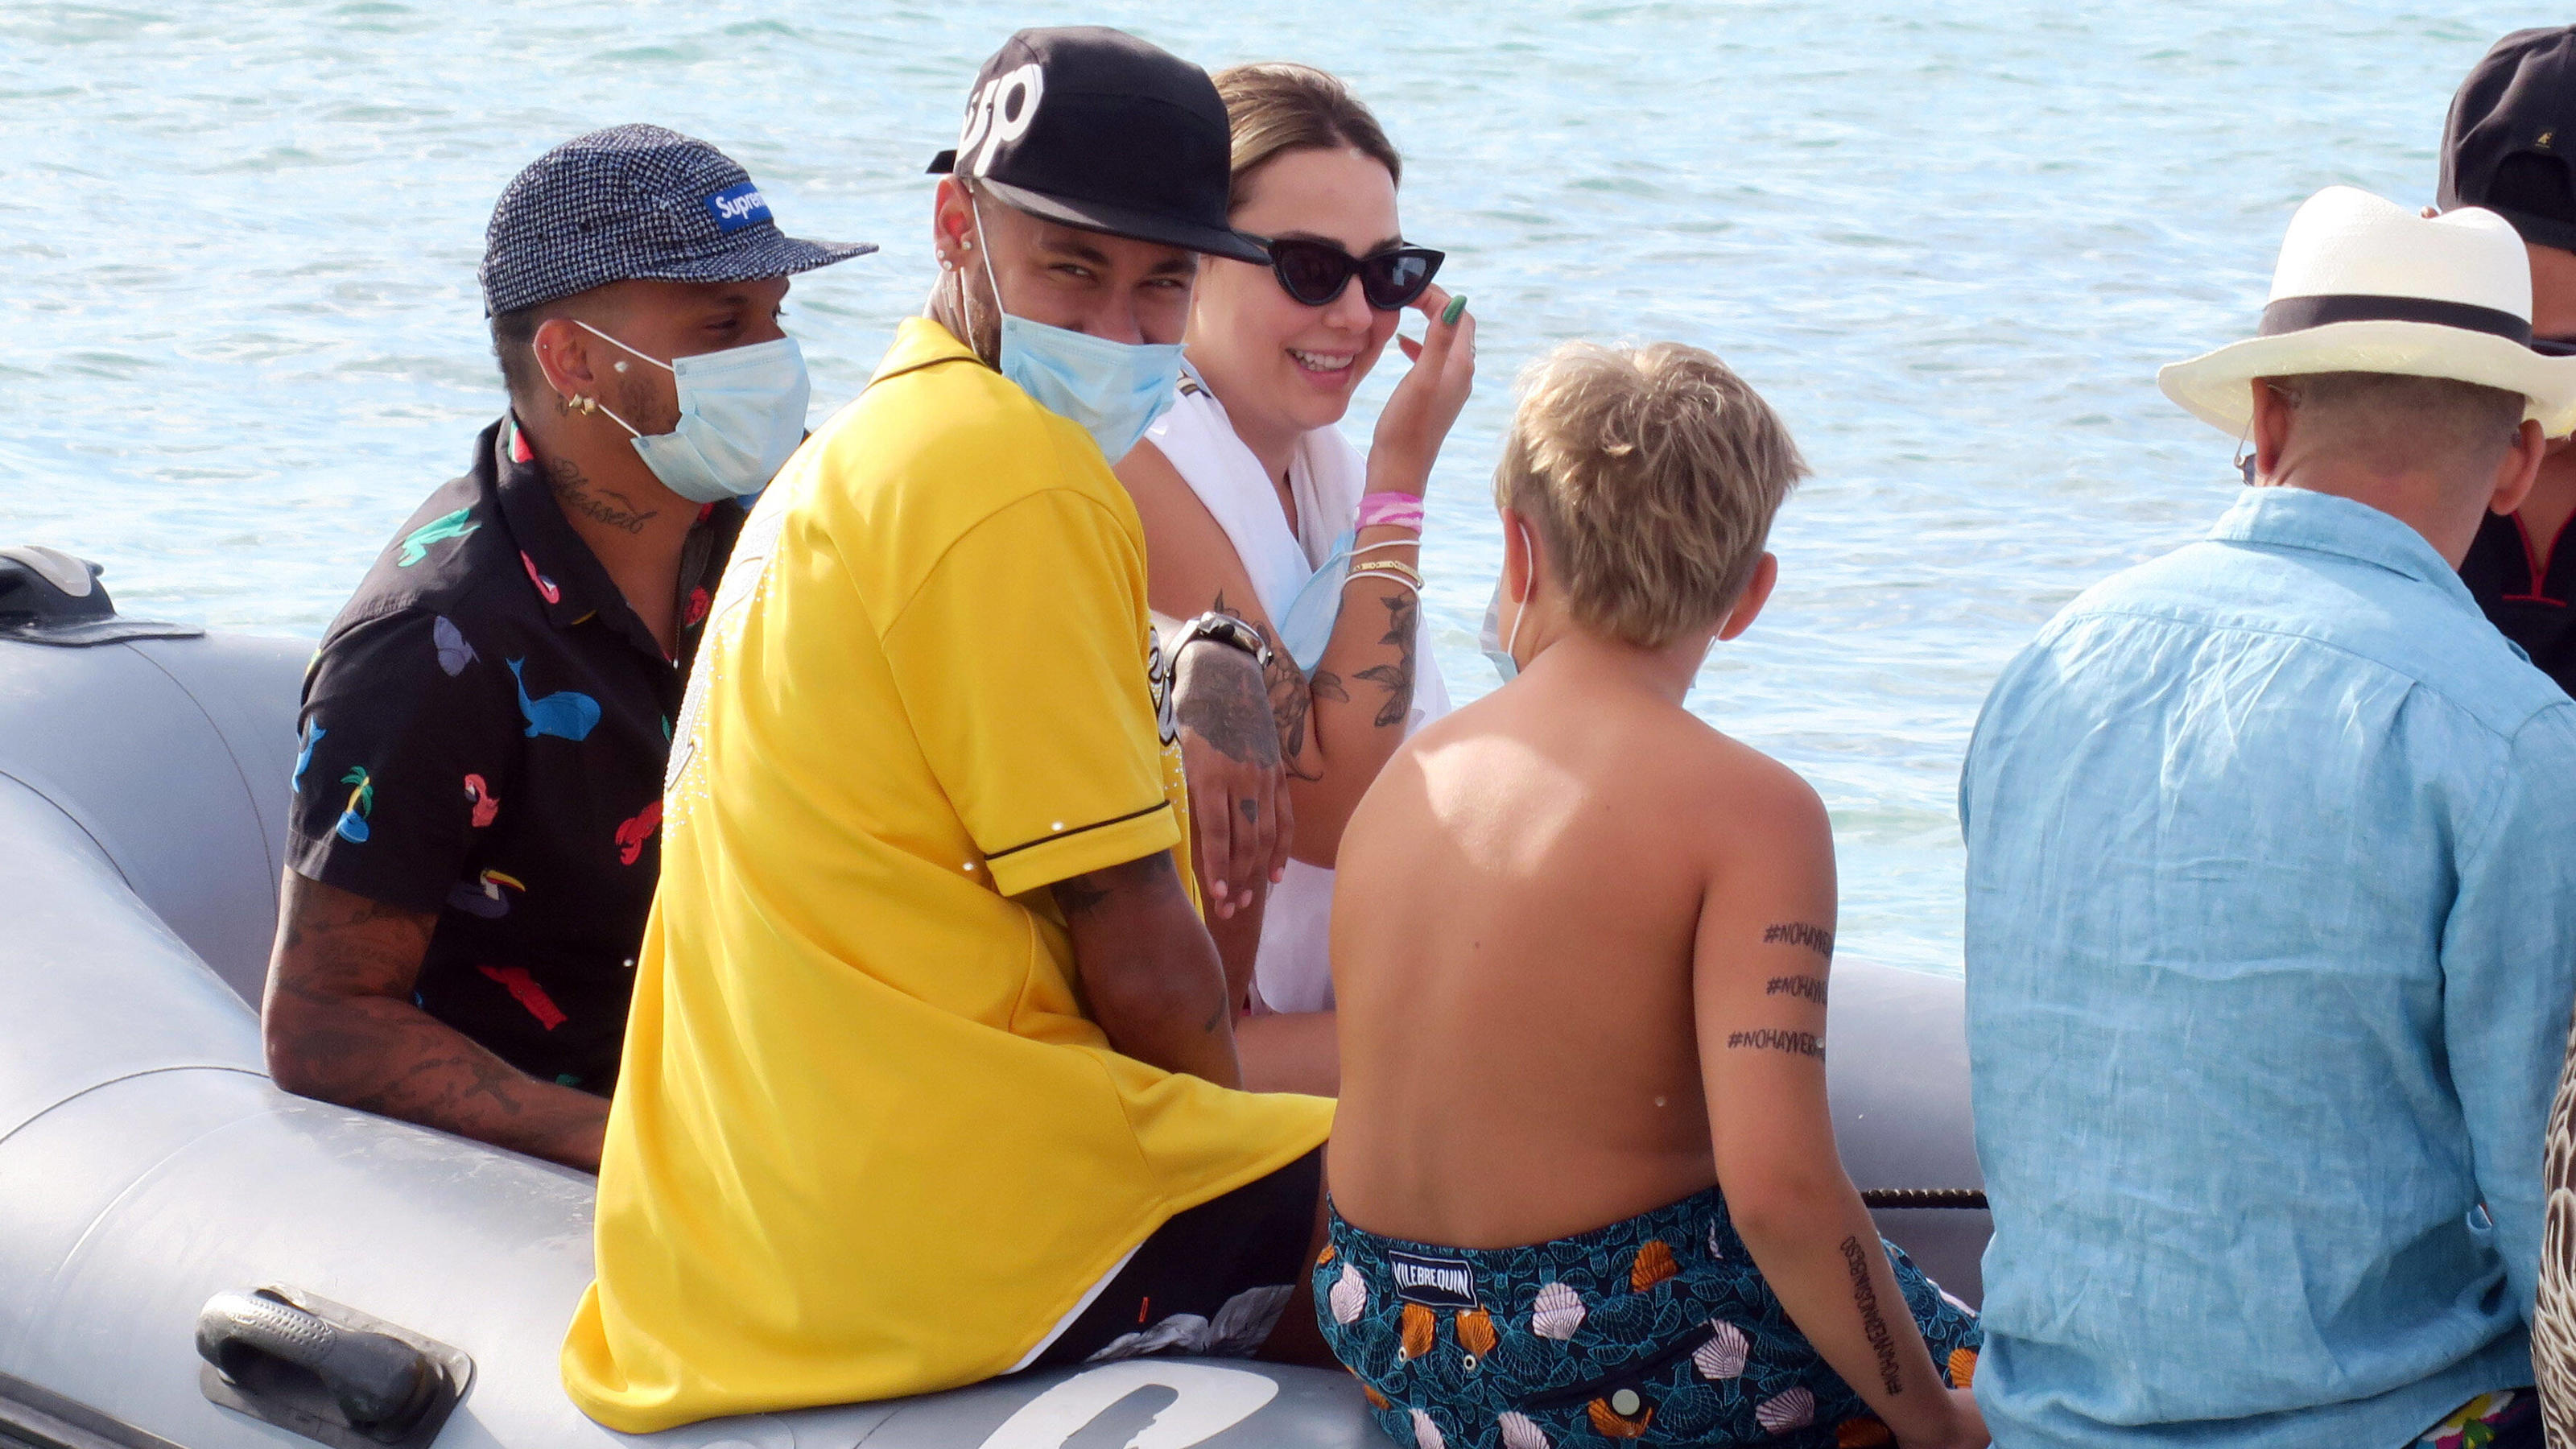 Formentera, Spain.Neymar relaxes on the boat with a group of friends, but it is when he goes down to the beach that he transforms into a protective father hugging his son Davi Lucca in the moment of the assault of the fans. PUBLICATIONxINxGERxAUTxONL